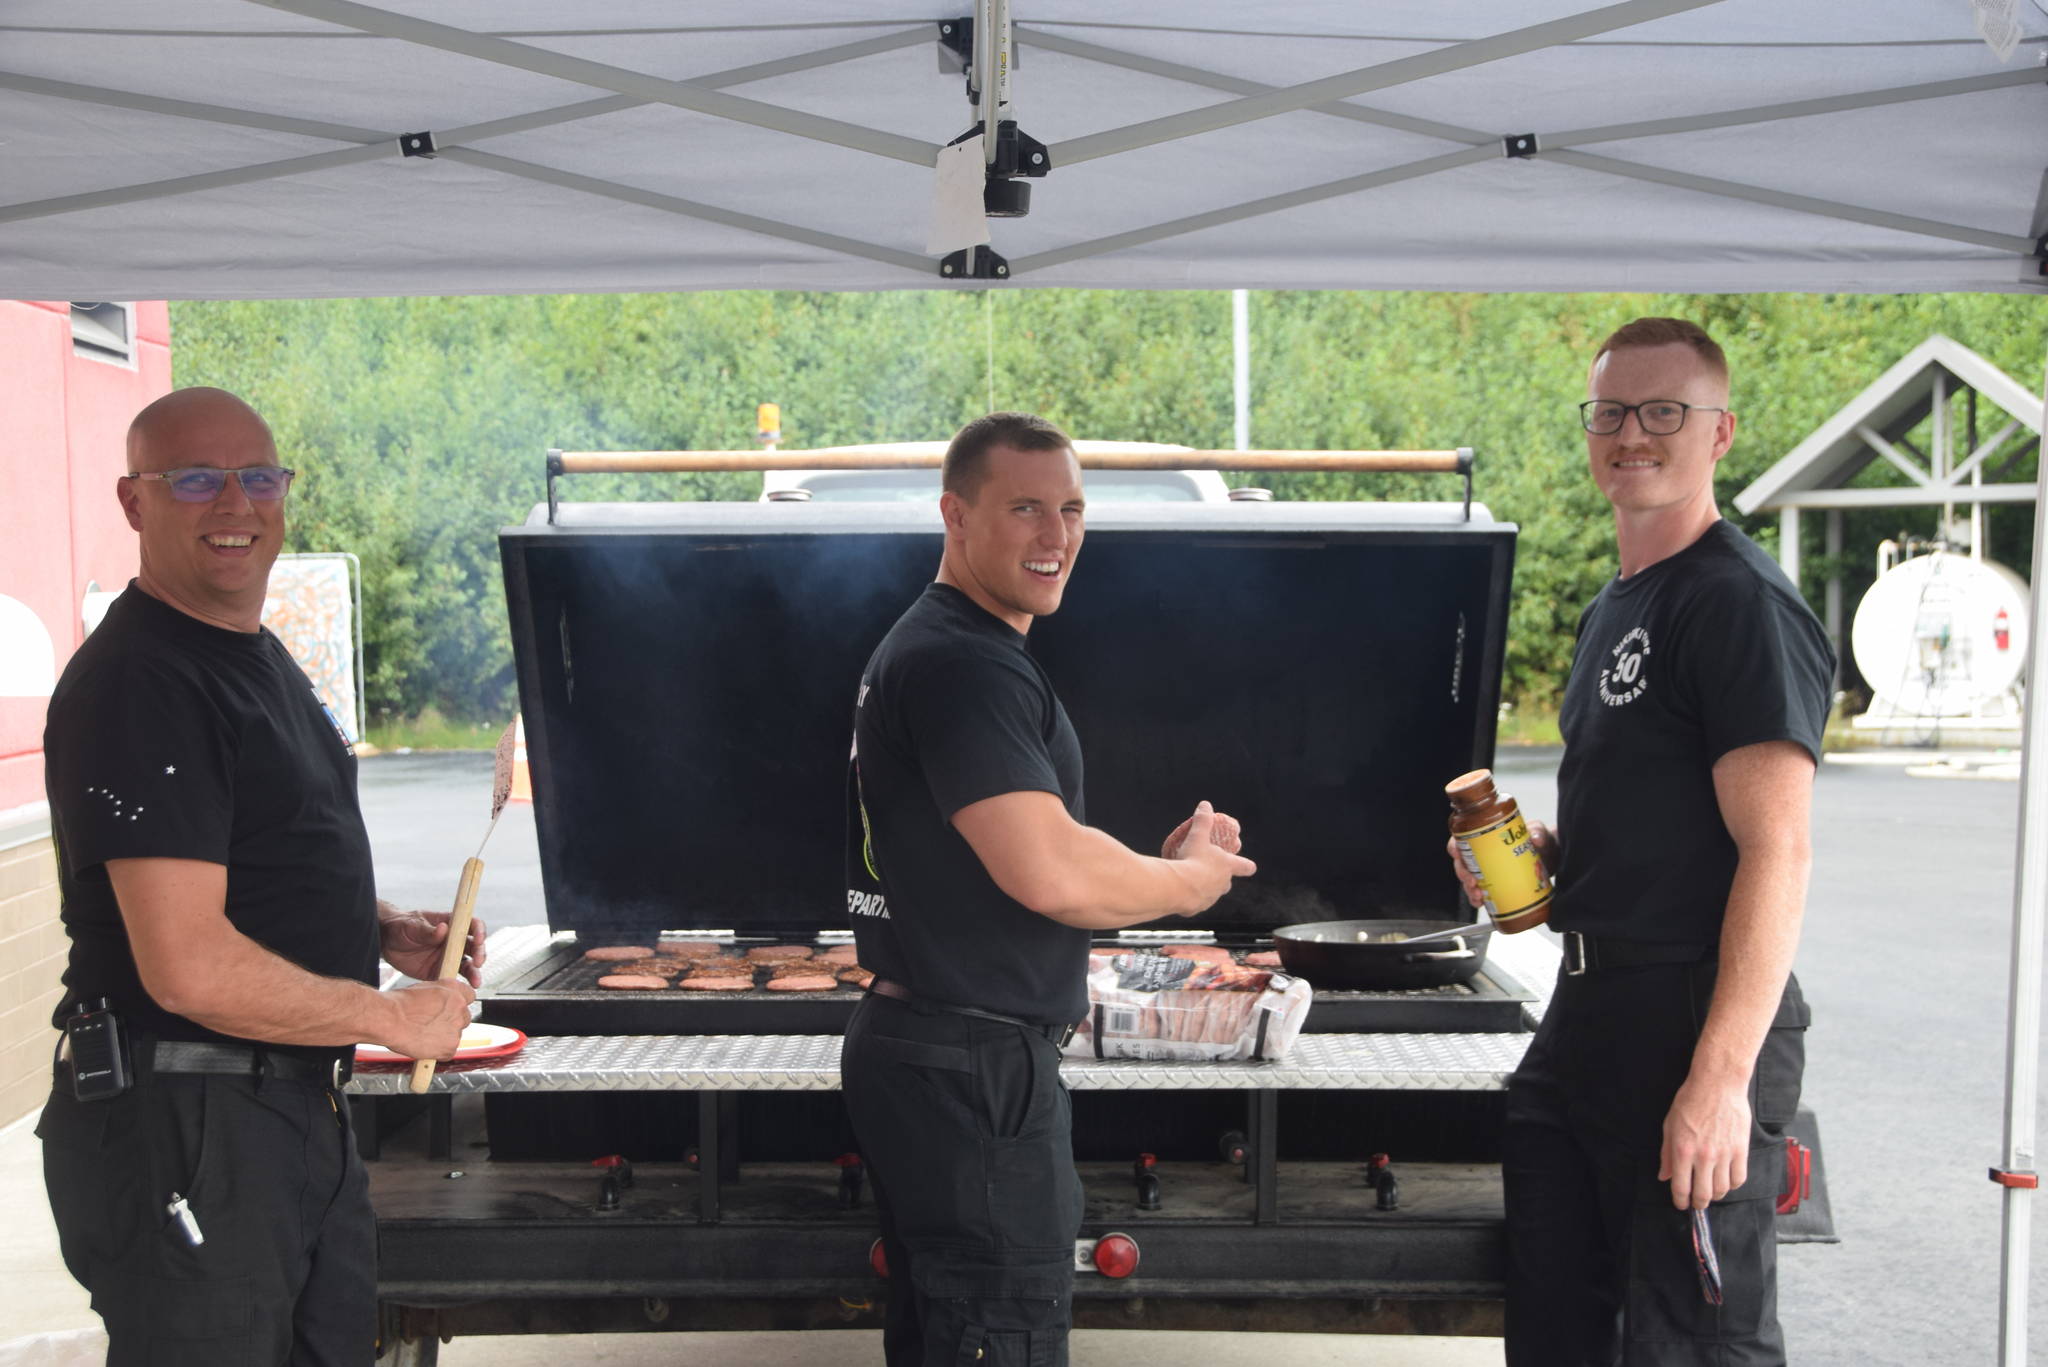 From left, Firefighters Jason Tauriainen, Stephen Hartley and Jesse Ross man the grill at Fire Station #2 during the Nikiski Fire Department’s 50th anniversary celebration in Nikiski, Alaska on July 15, 2019. (Photo by Brian Mazurek/Peninsula Clarion)